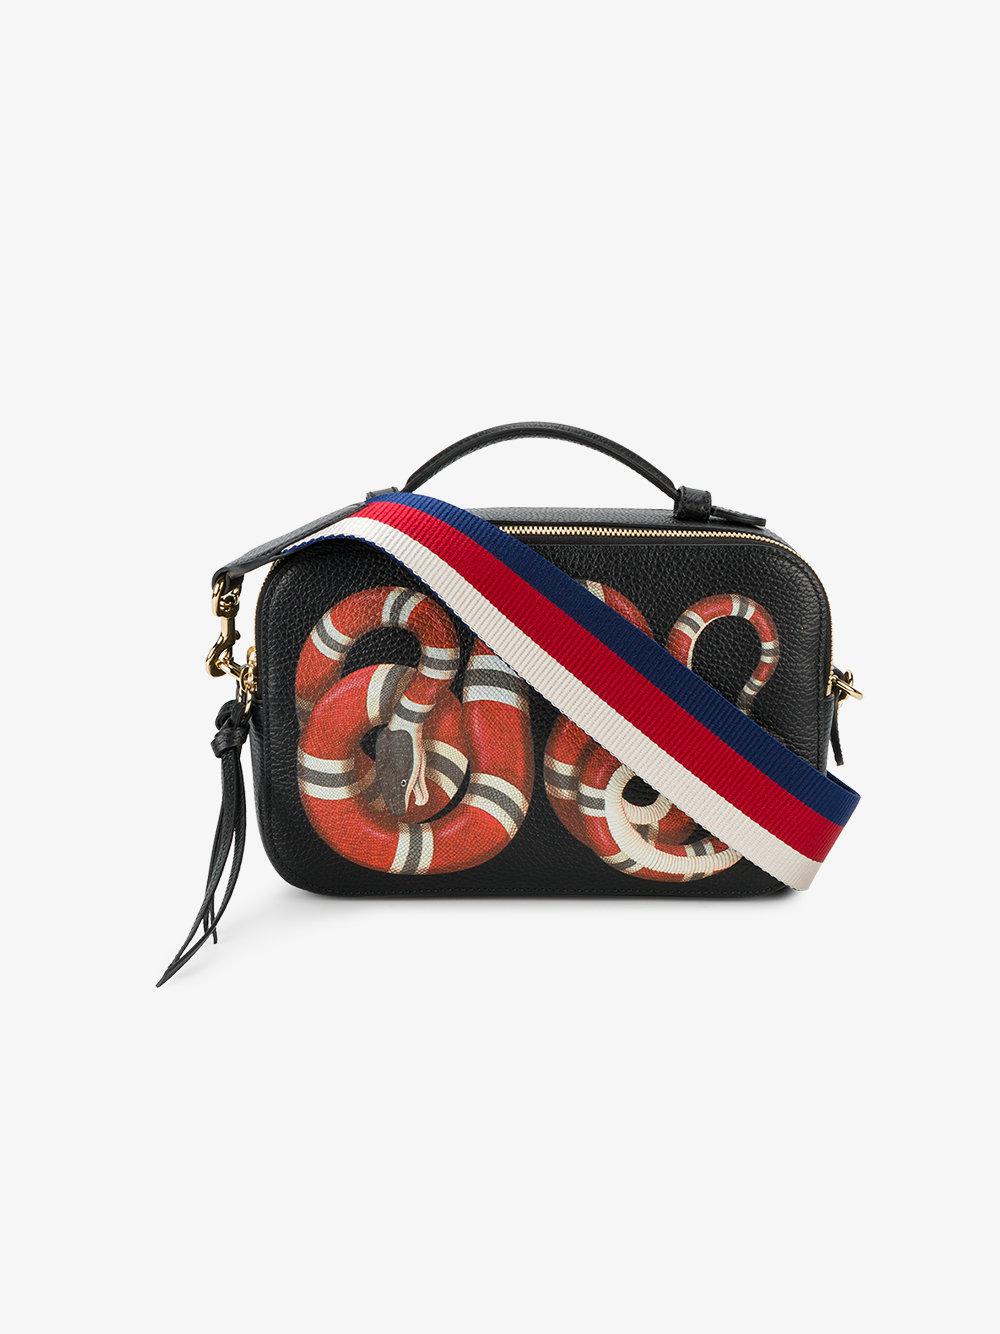 black gucci snake bag,Save up to 19%,www.ilcascinone.com